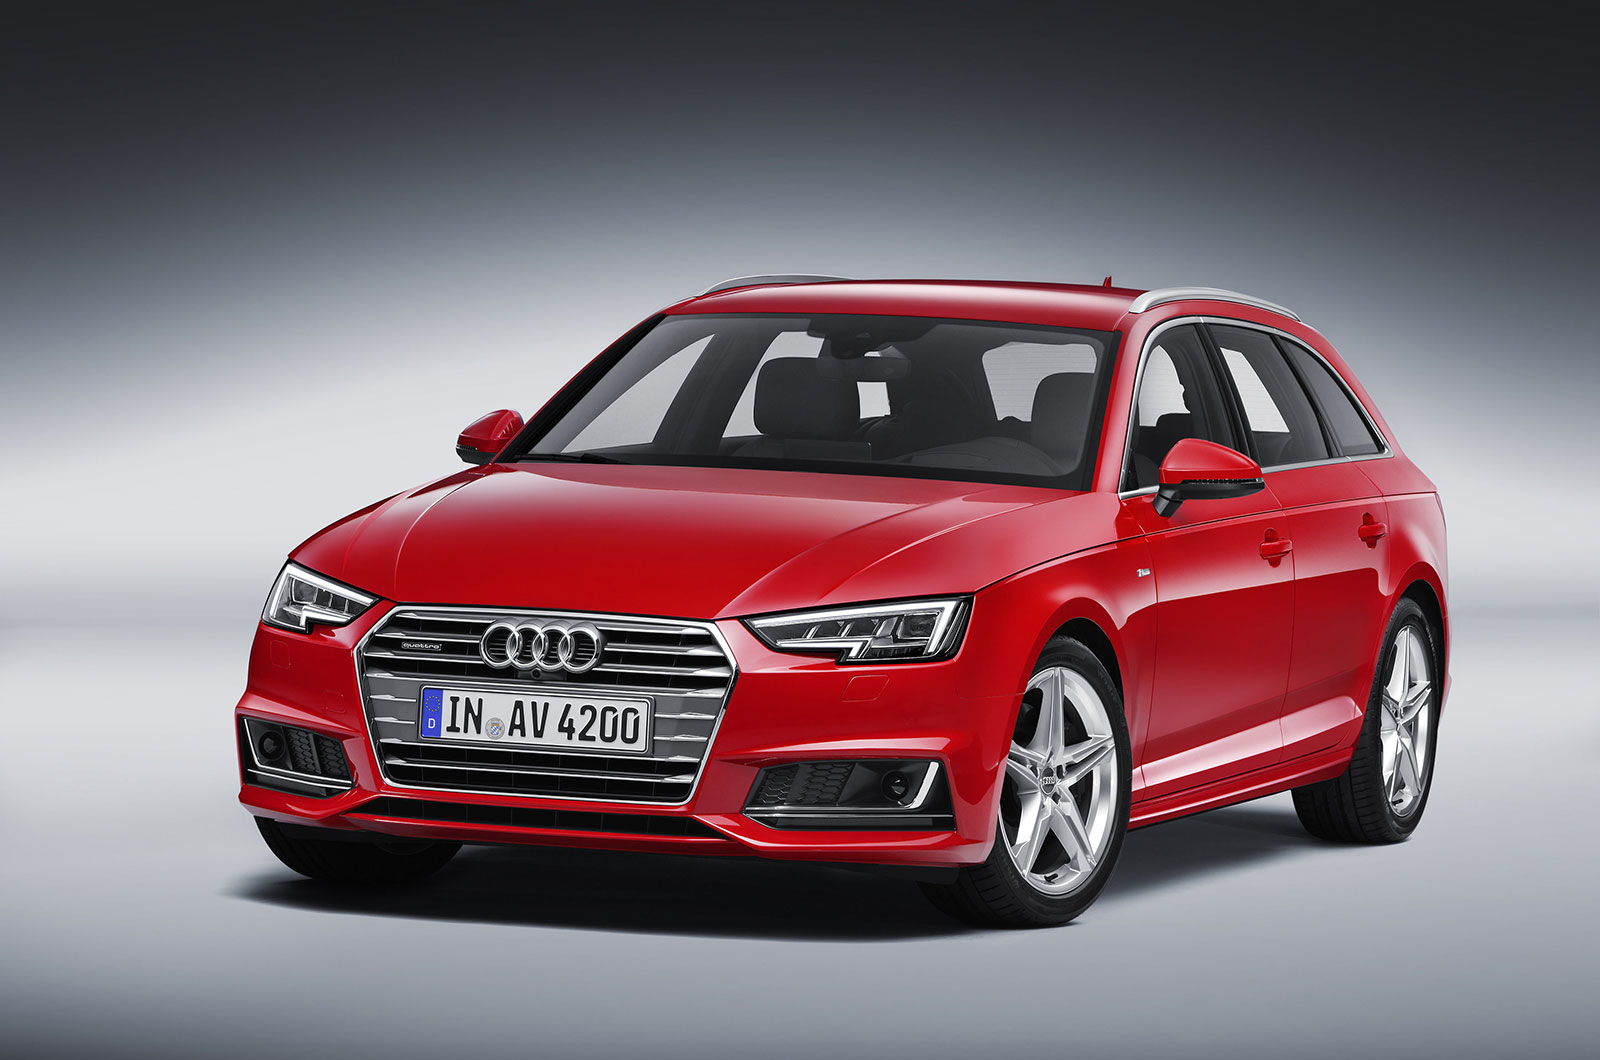 Boven hoofd en schouder analyseren Pef 2015 Audi A4 - latest pictures and details | Autocar